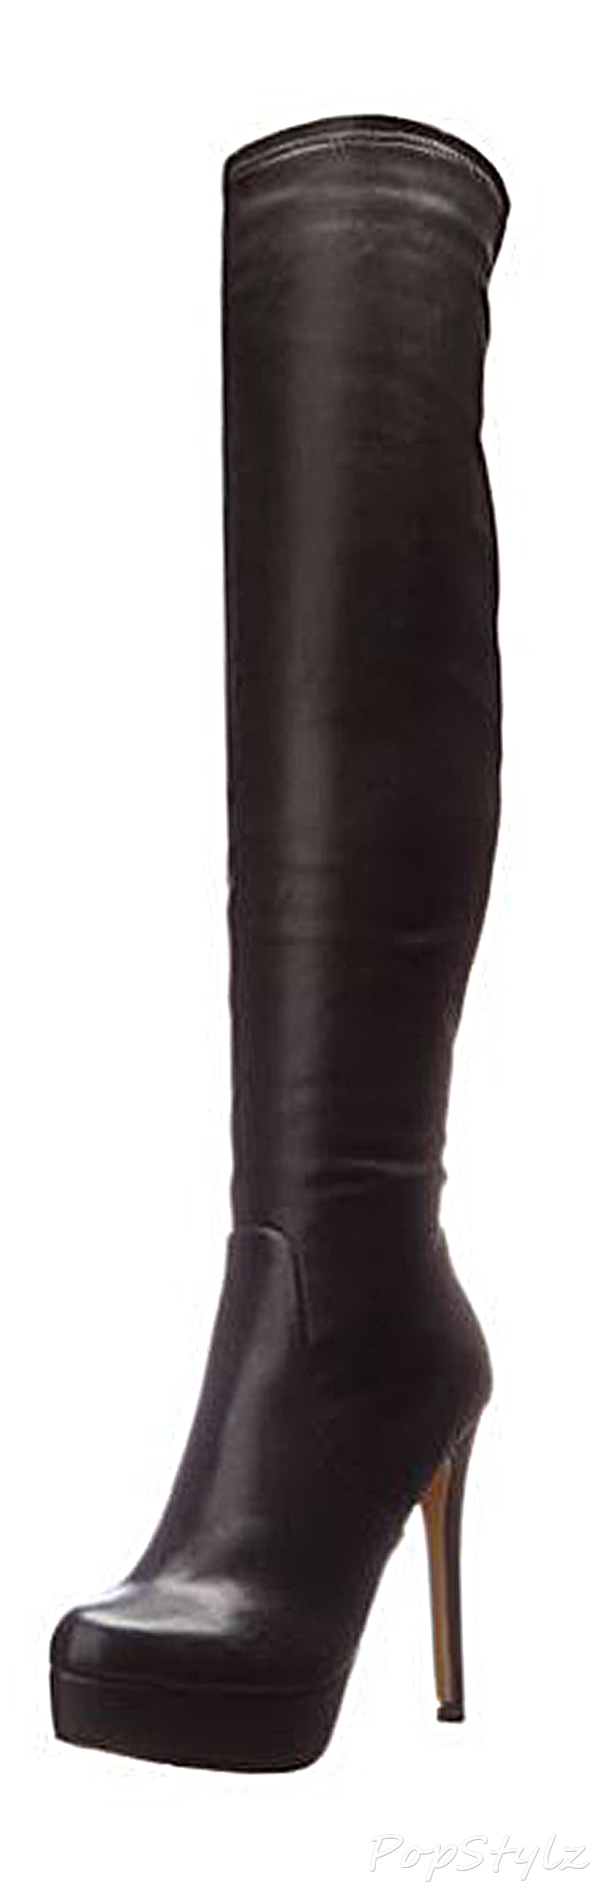 Chinese Laundry Luster Smooth Black Dress Boot